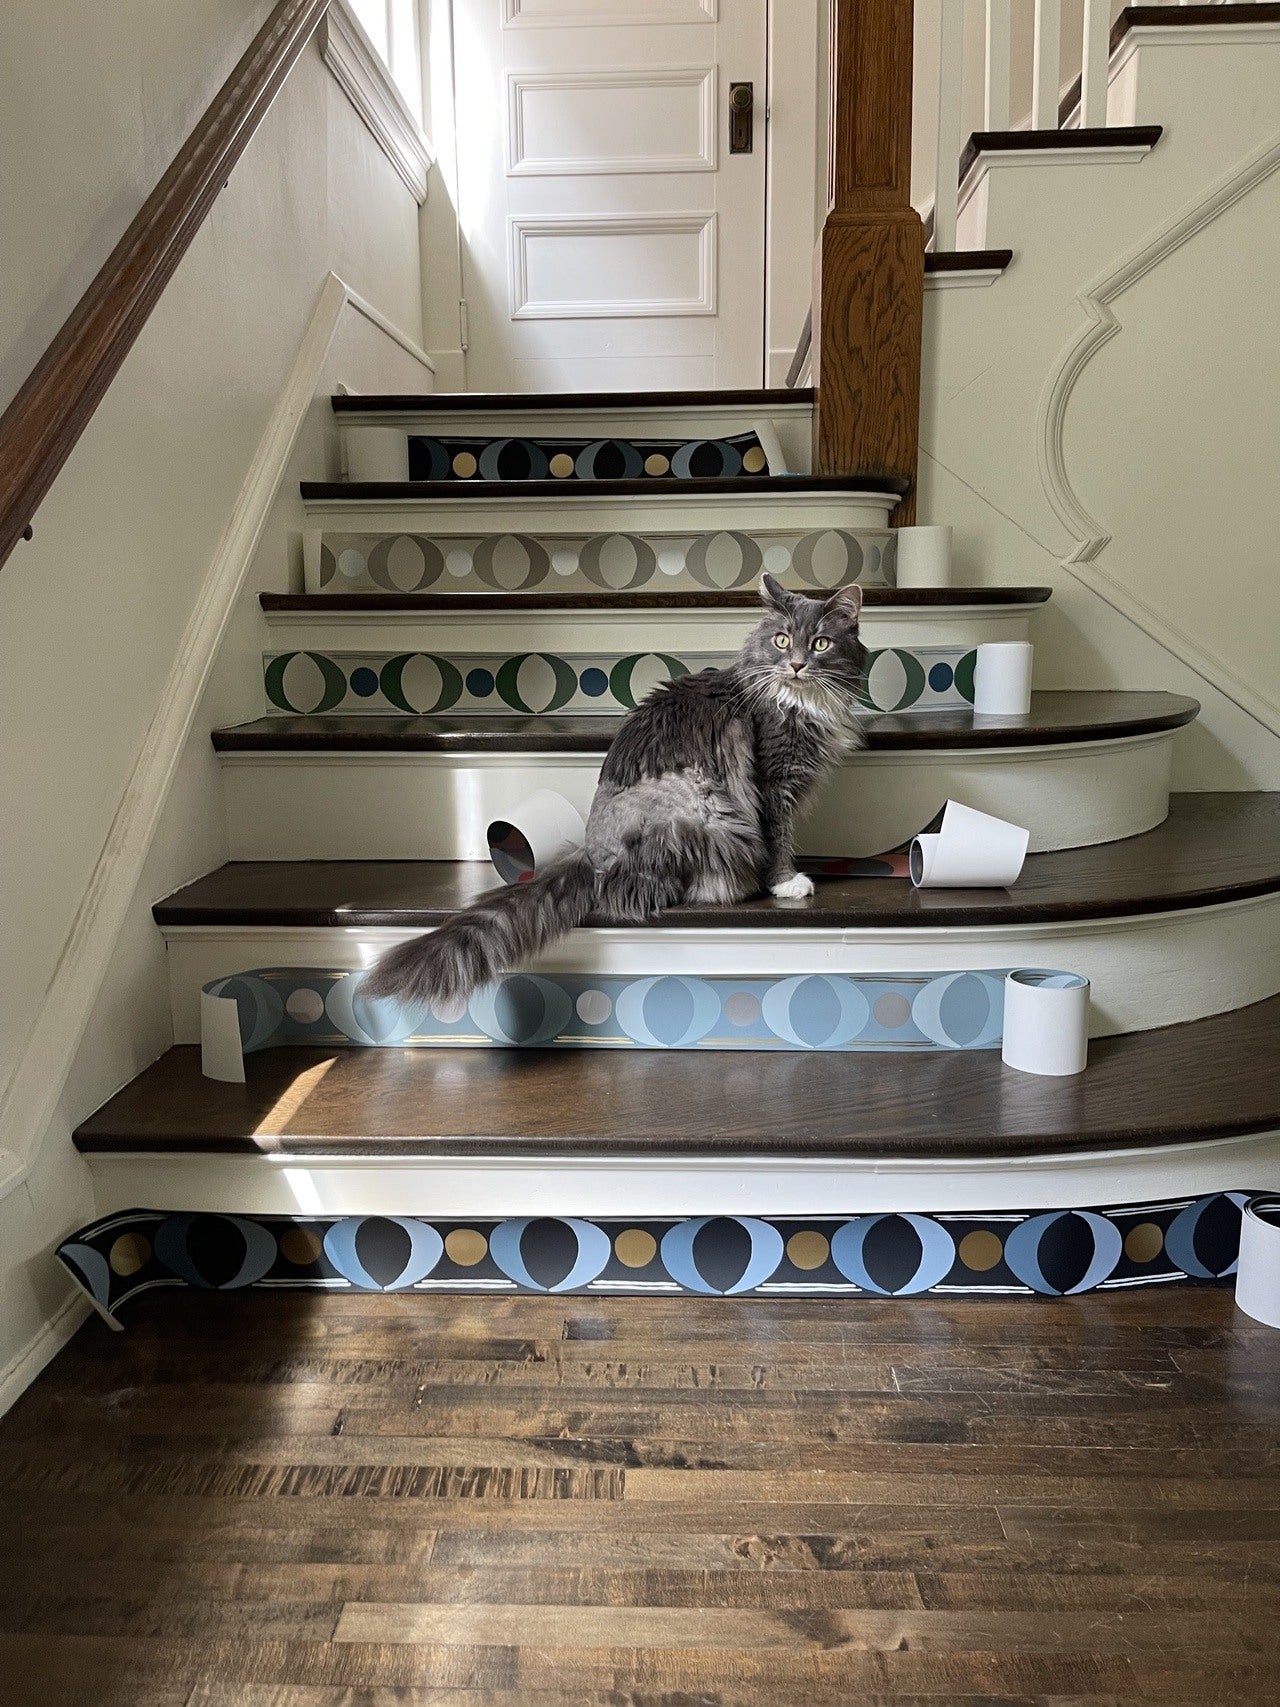 Lune Borders on stairs | Nathalie Lete x Hygge & West